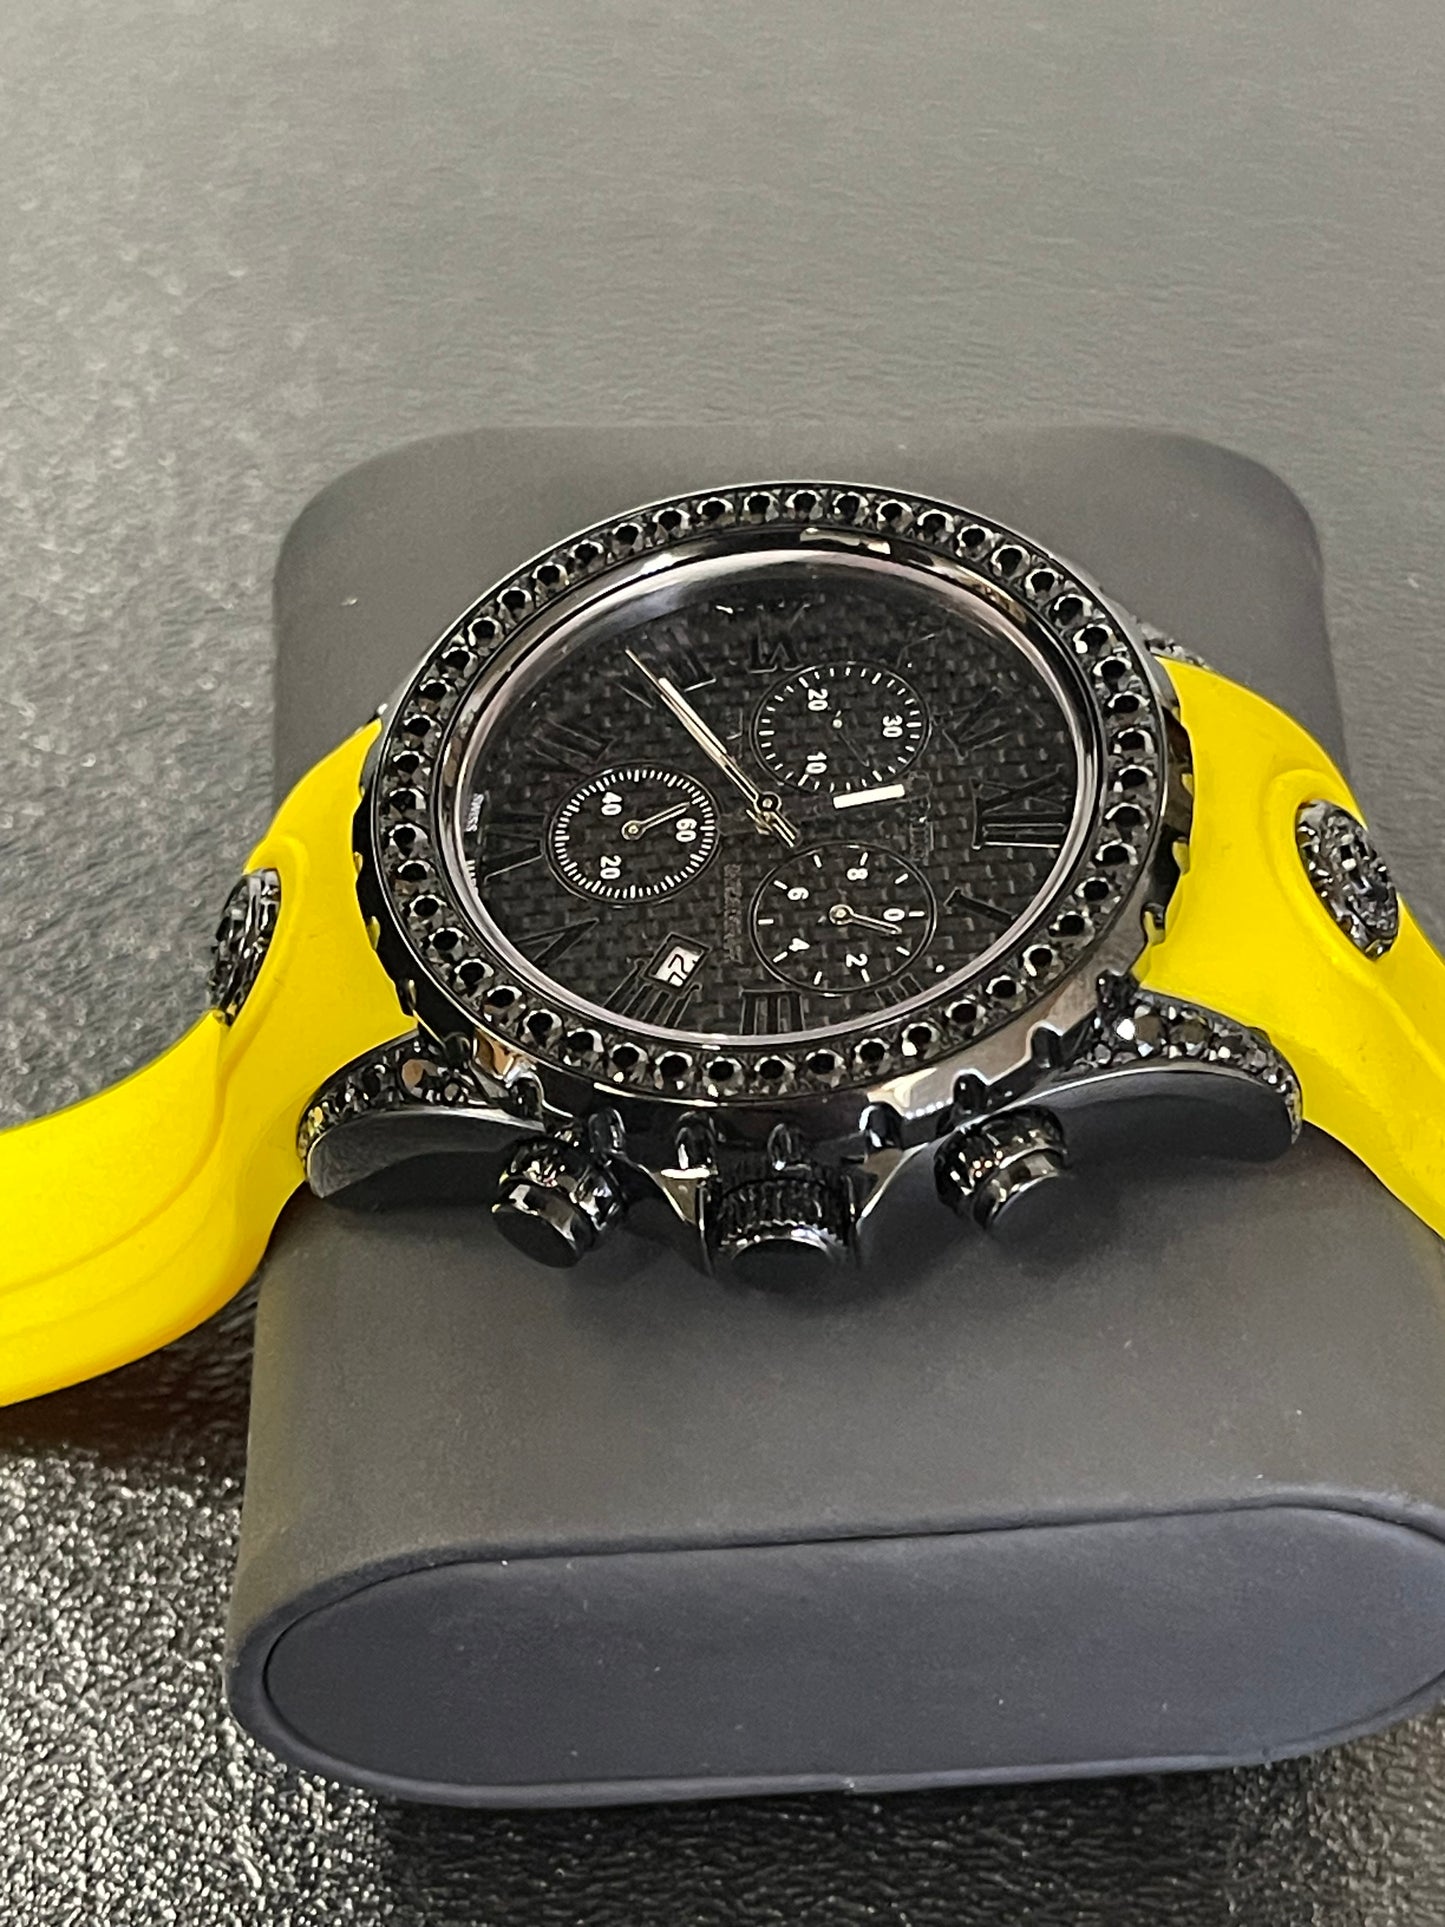 ALL BLACK/YELLOW T4 CARBON FIBER LIMITED EDITION